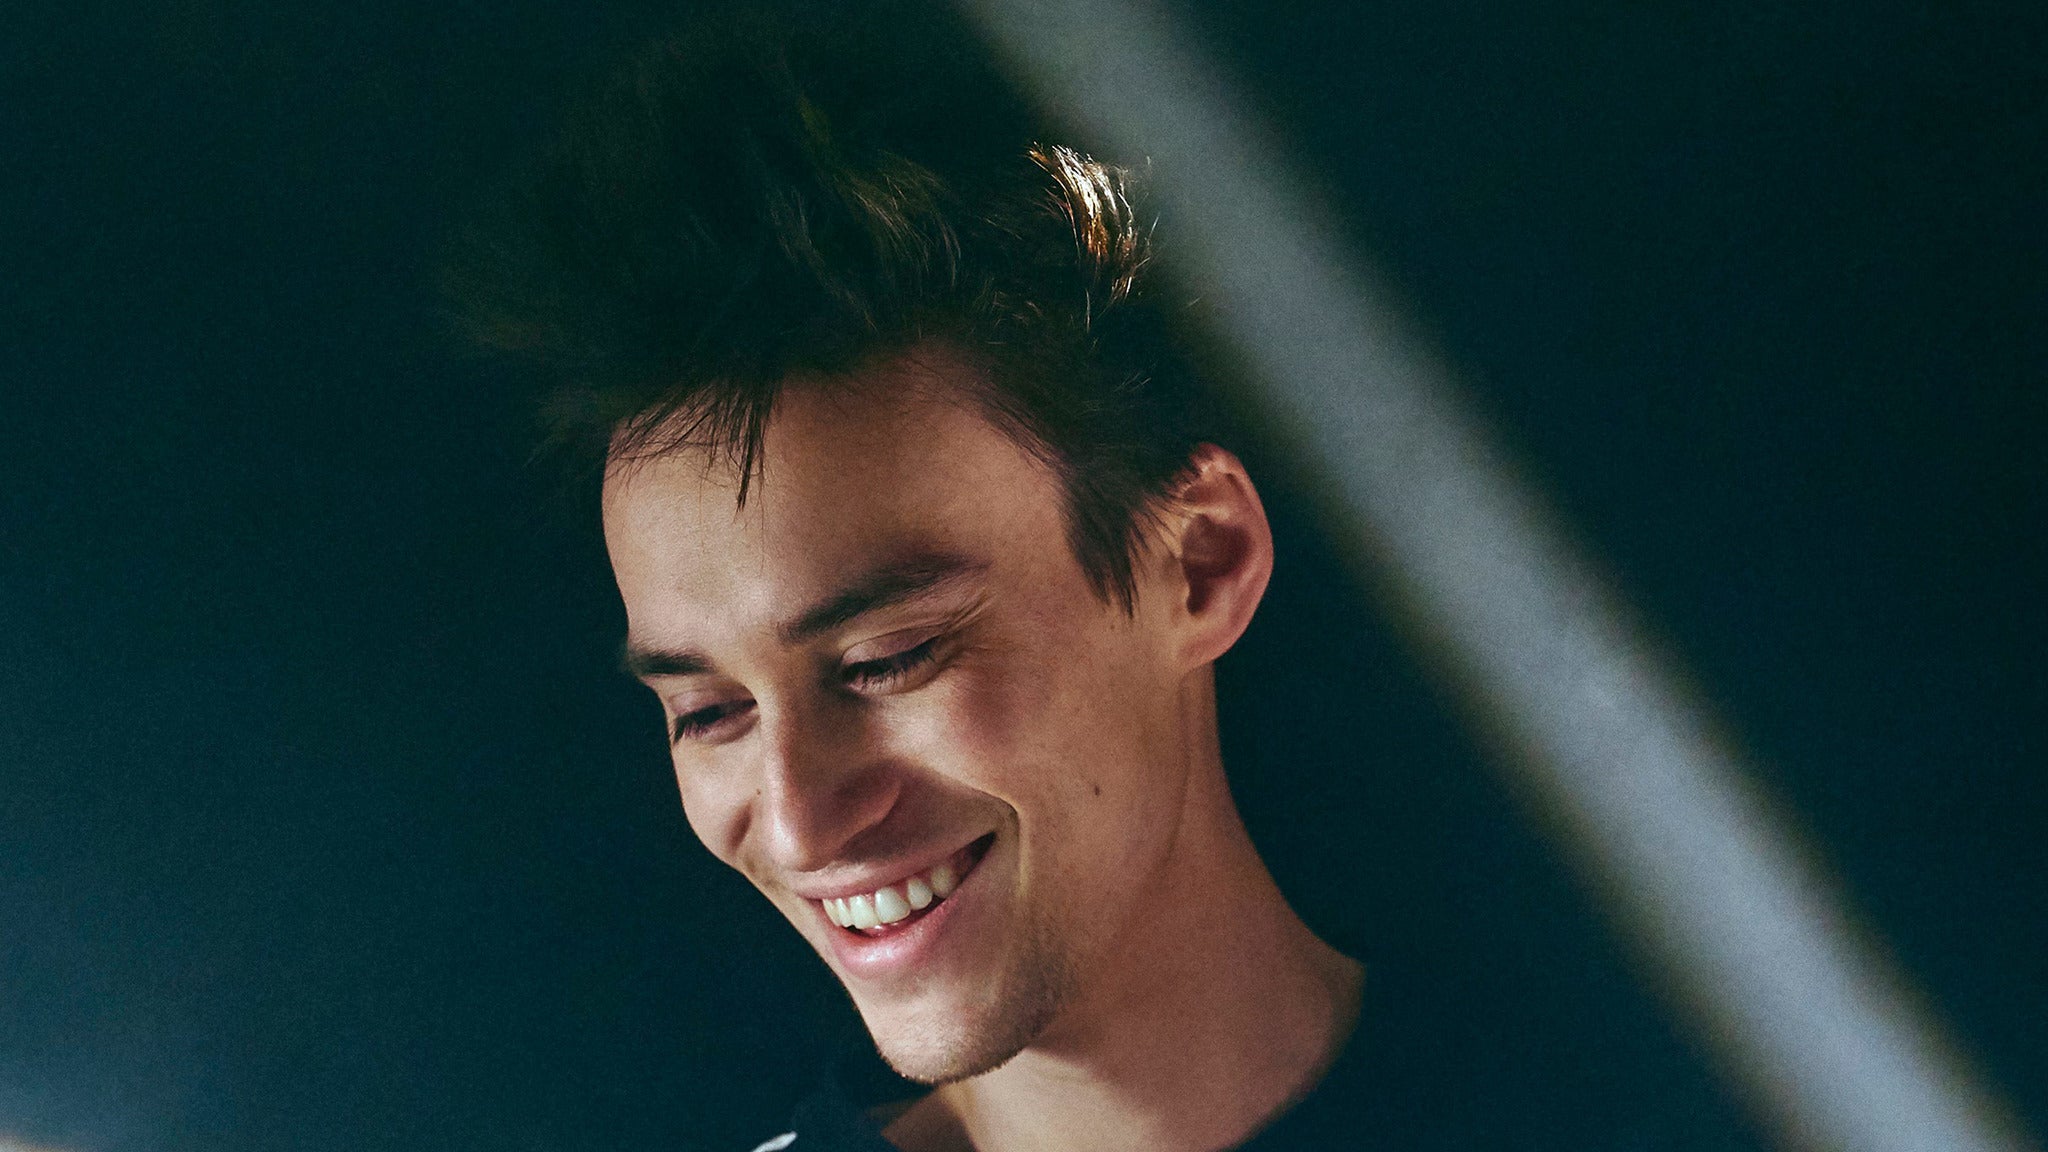 Image used with permission from Ticketmaster | Jacob Collier tickets